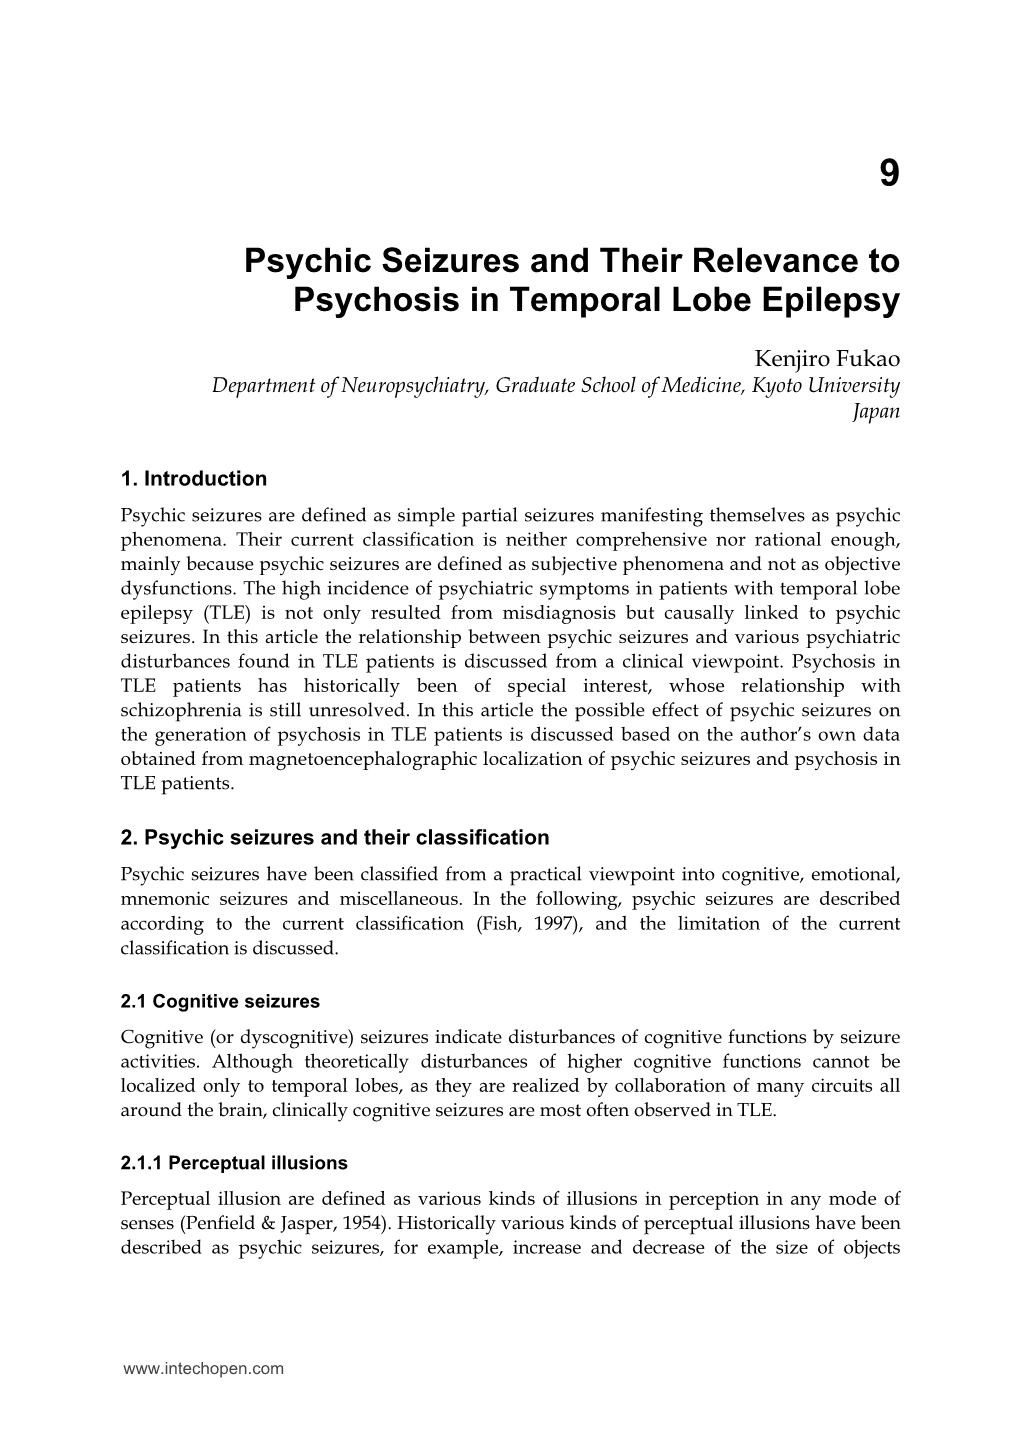 Psychic Seizures and Their Relevance to Psychosis in Temporal Lobe Epilepsy